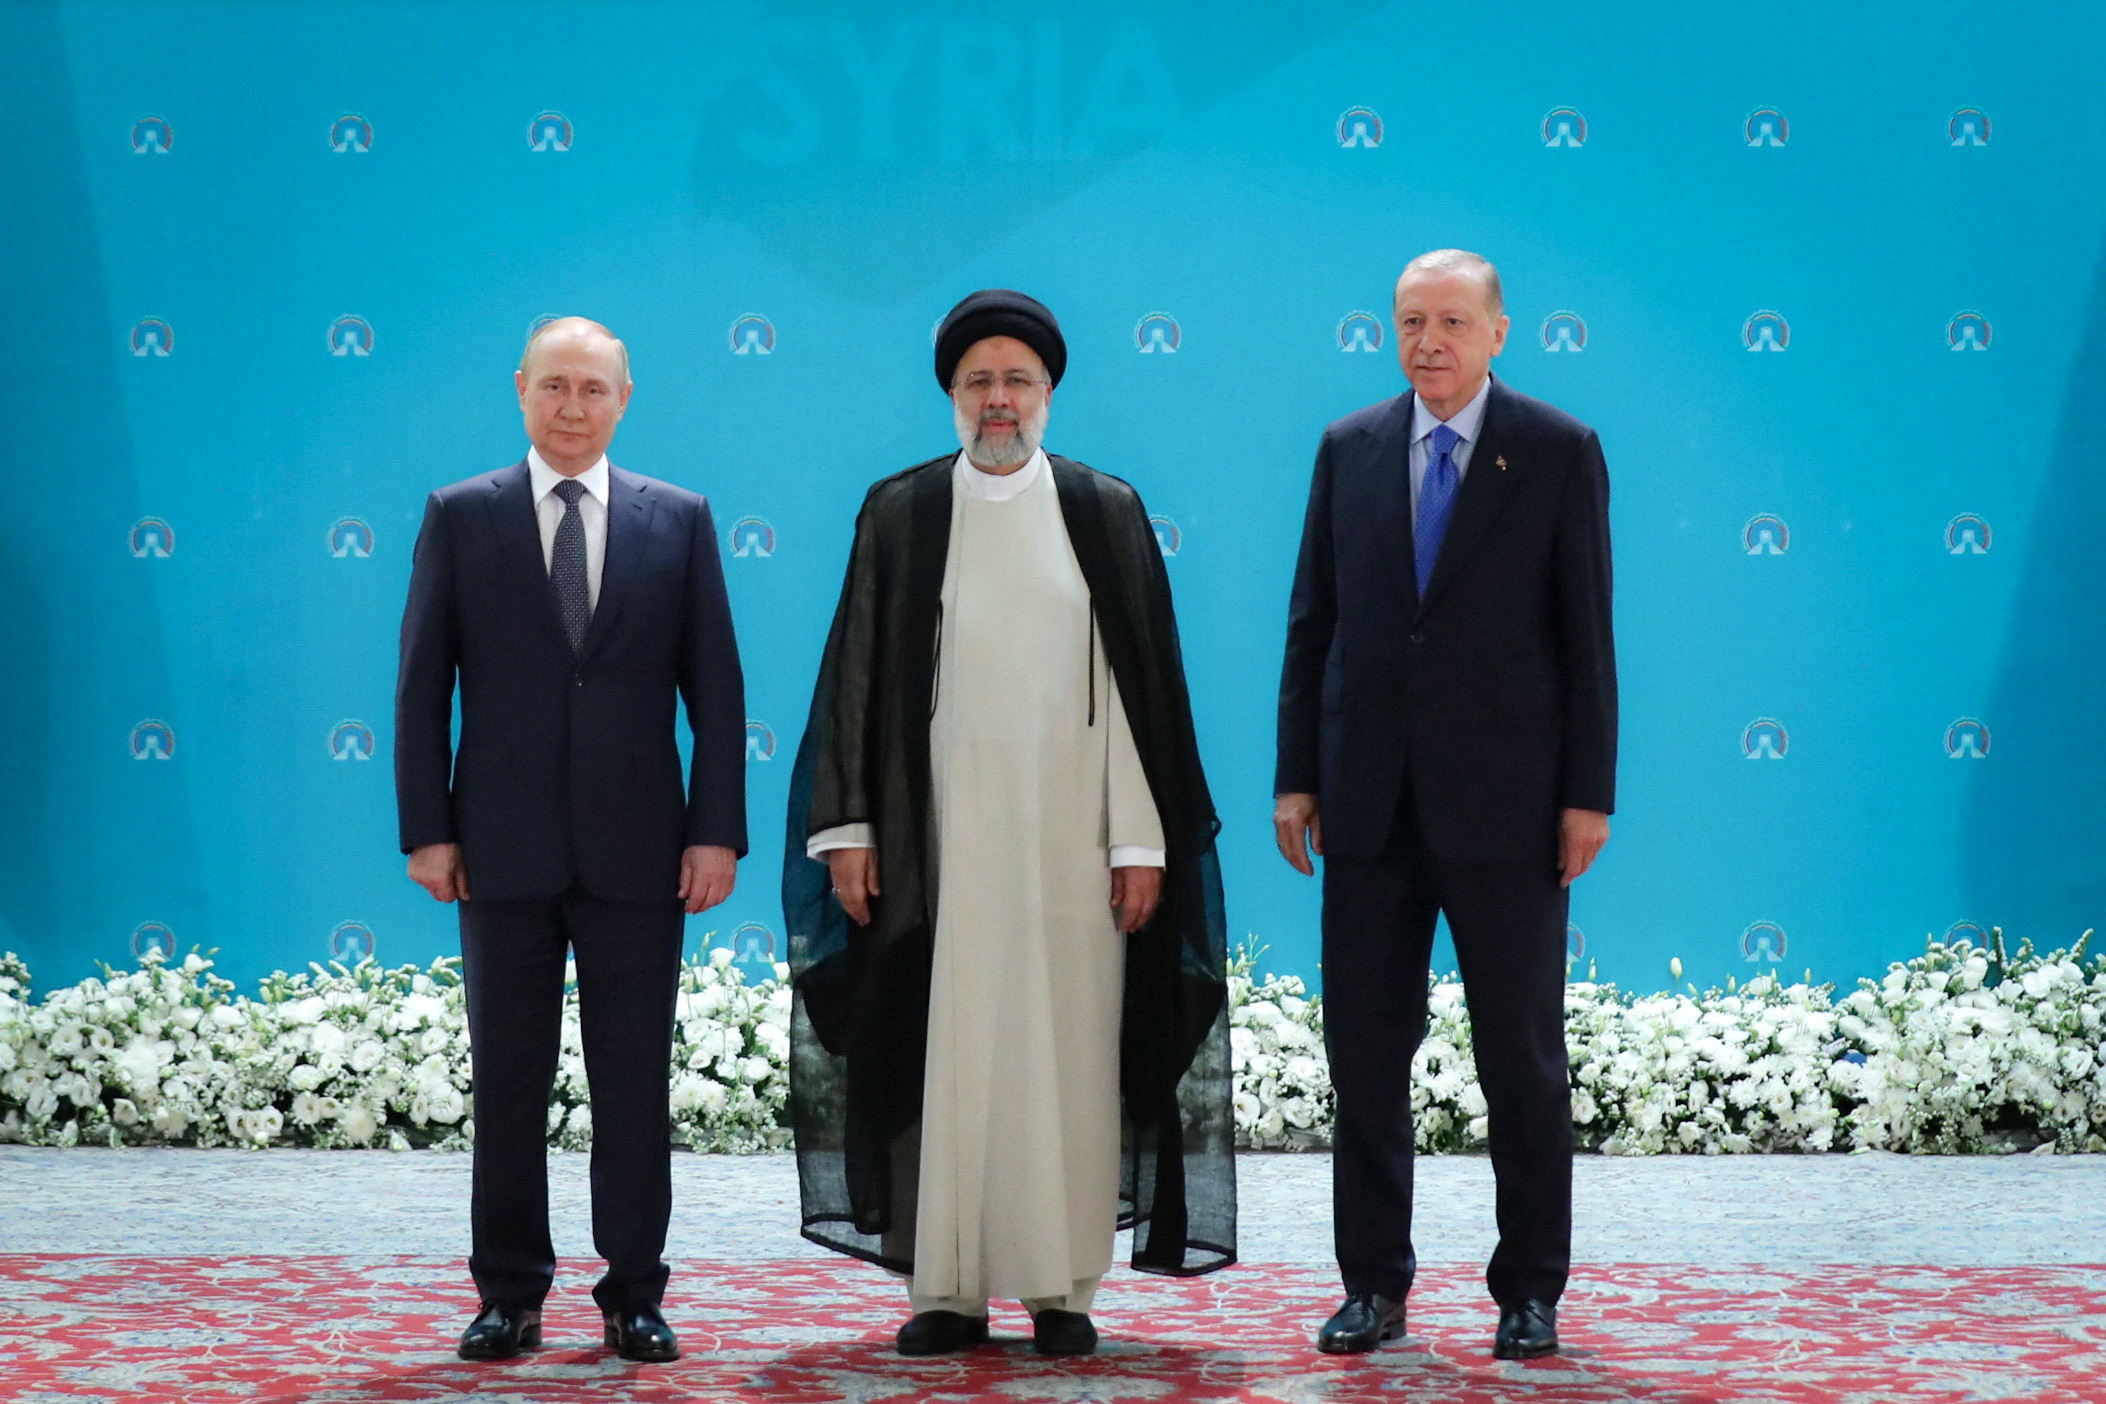 Russian President Vladimir Putin, Iranian President Ebrahim Raisi and Turkish President Tayyip Erdogan pose for a photo before a meeting of leaders from the three guarantor states of the Astana process, designed to find a peace settlement in Syria crisis